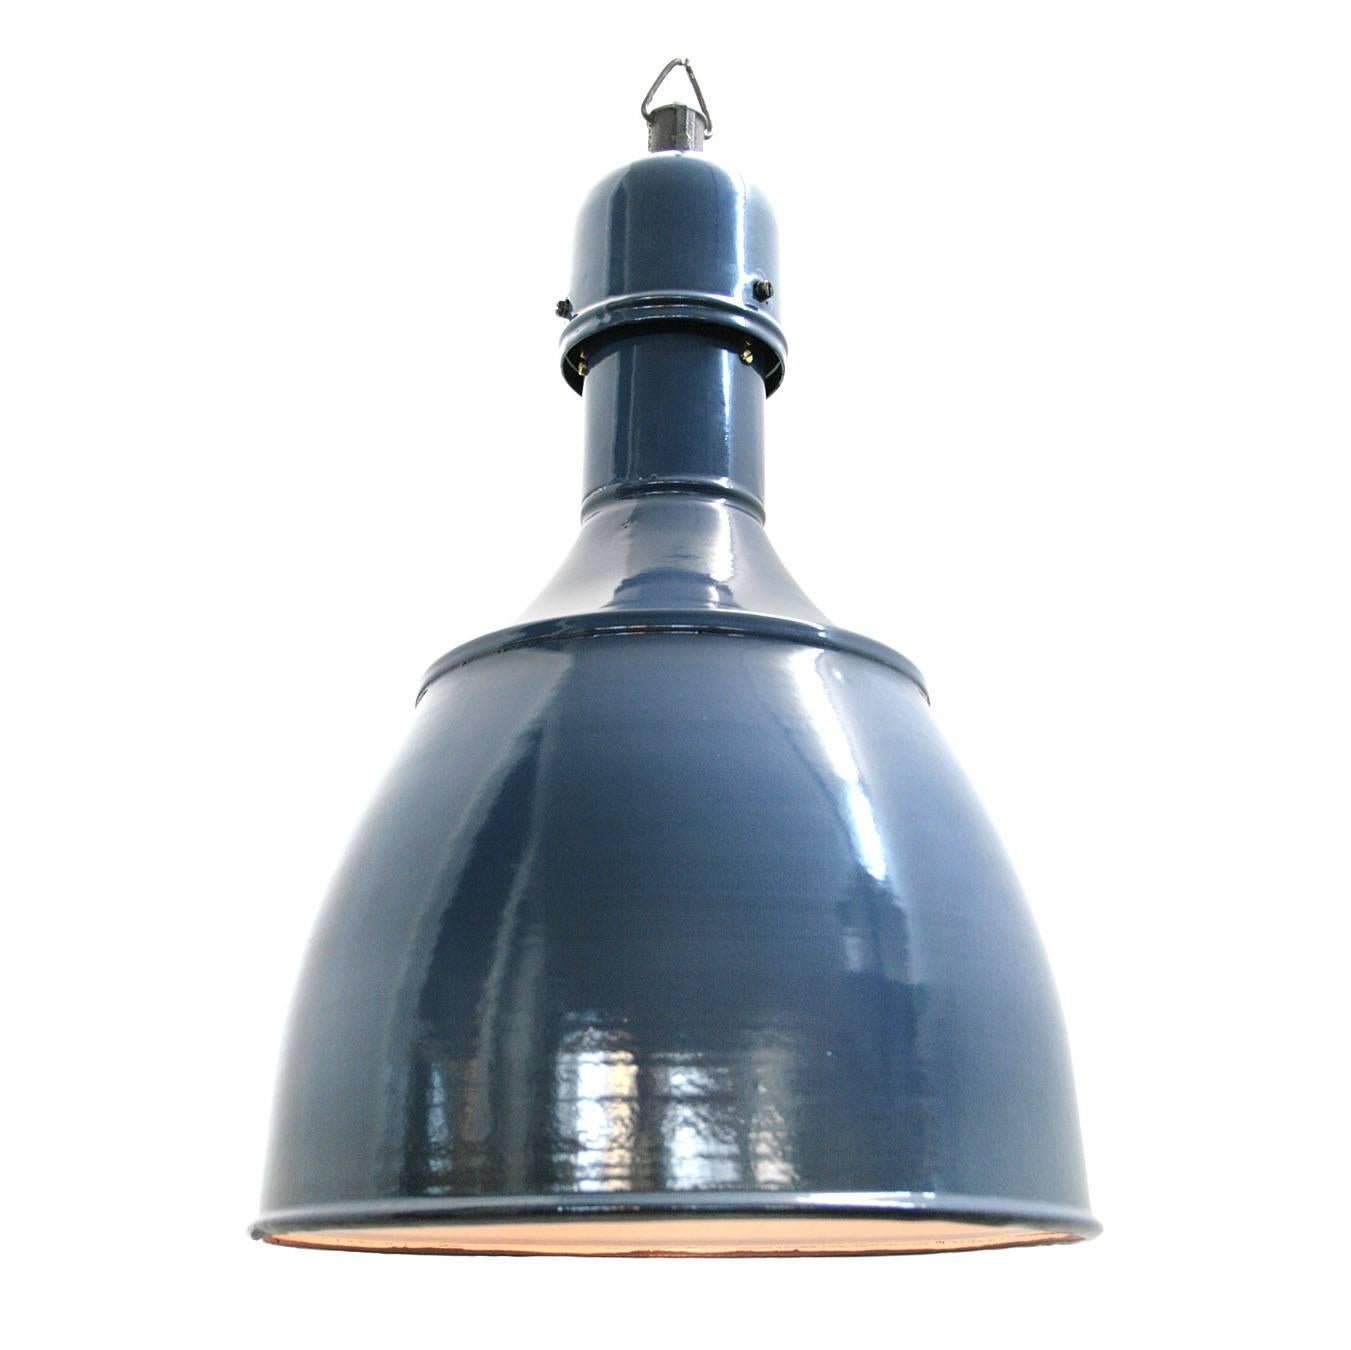 European Industrial Classic. Rare model. Used in warehouses and factories in east Europe. New Old Stock. Weight 2.3 kg or 5.1 lb.

All lamps have been made suitable by international standards for incandescent light bulbs, energy-efficient and LED